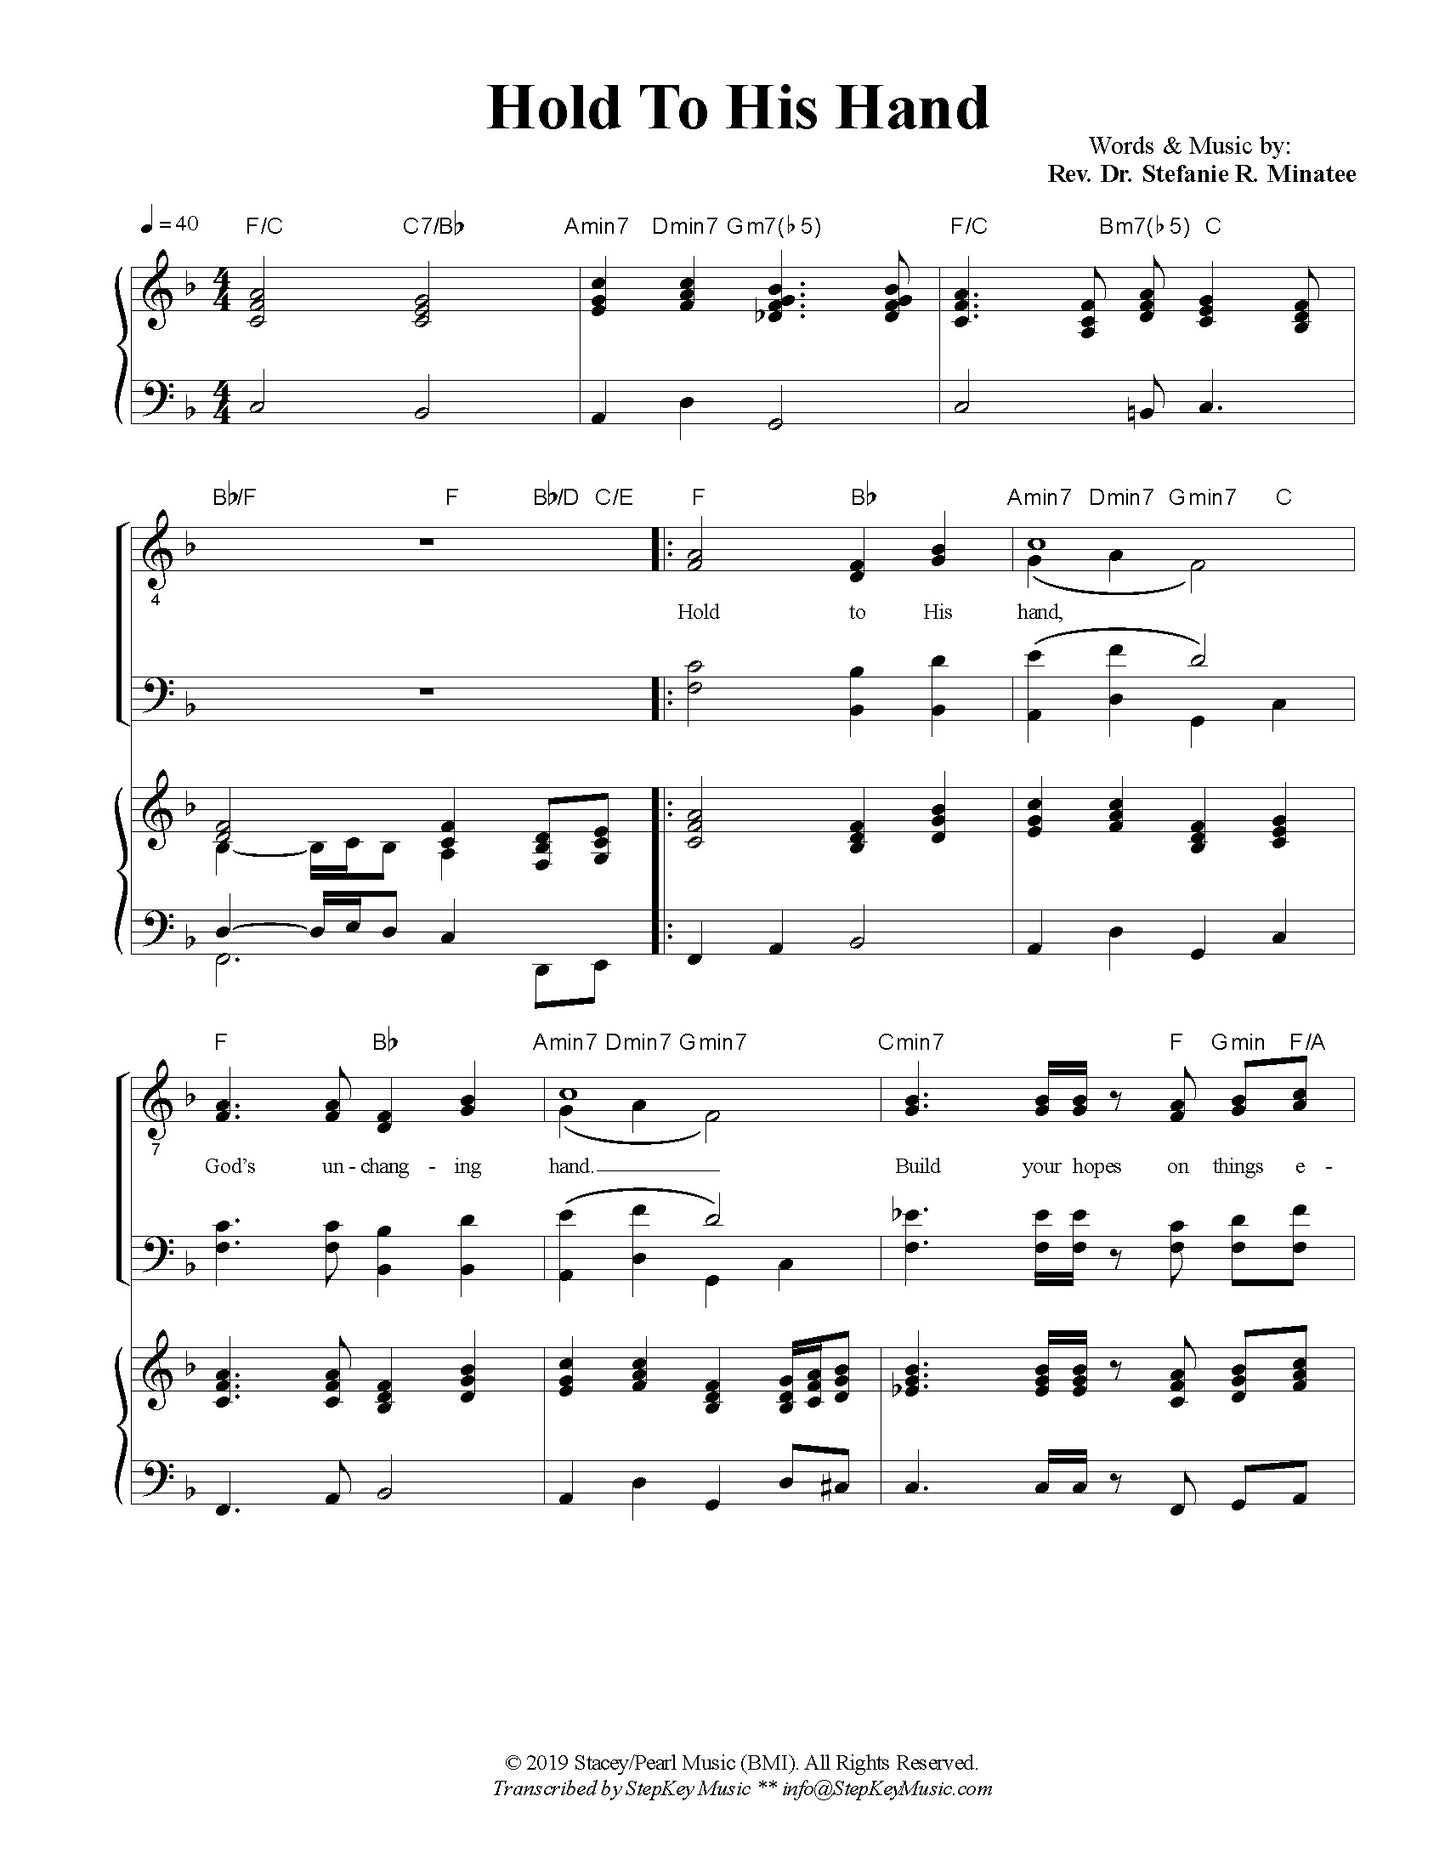 Hold To His Hand by Rev. Stefanie Minatee (Sheet Music)